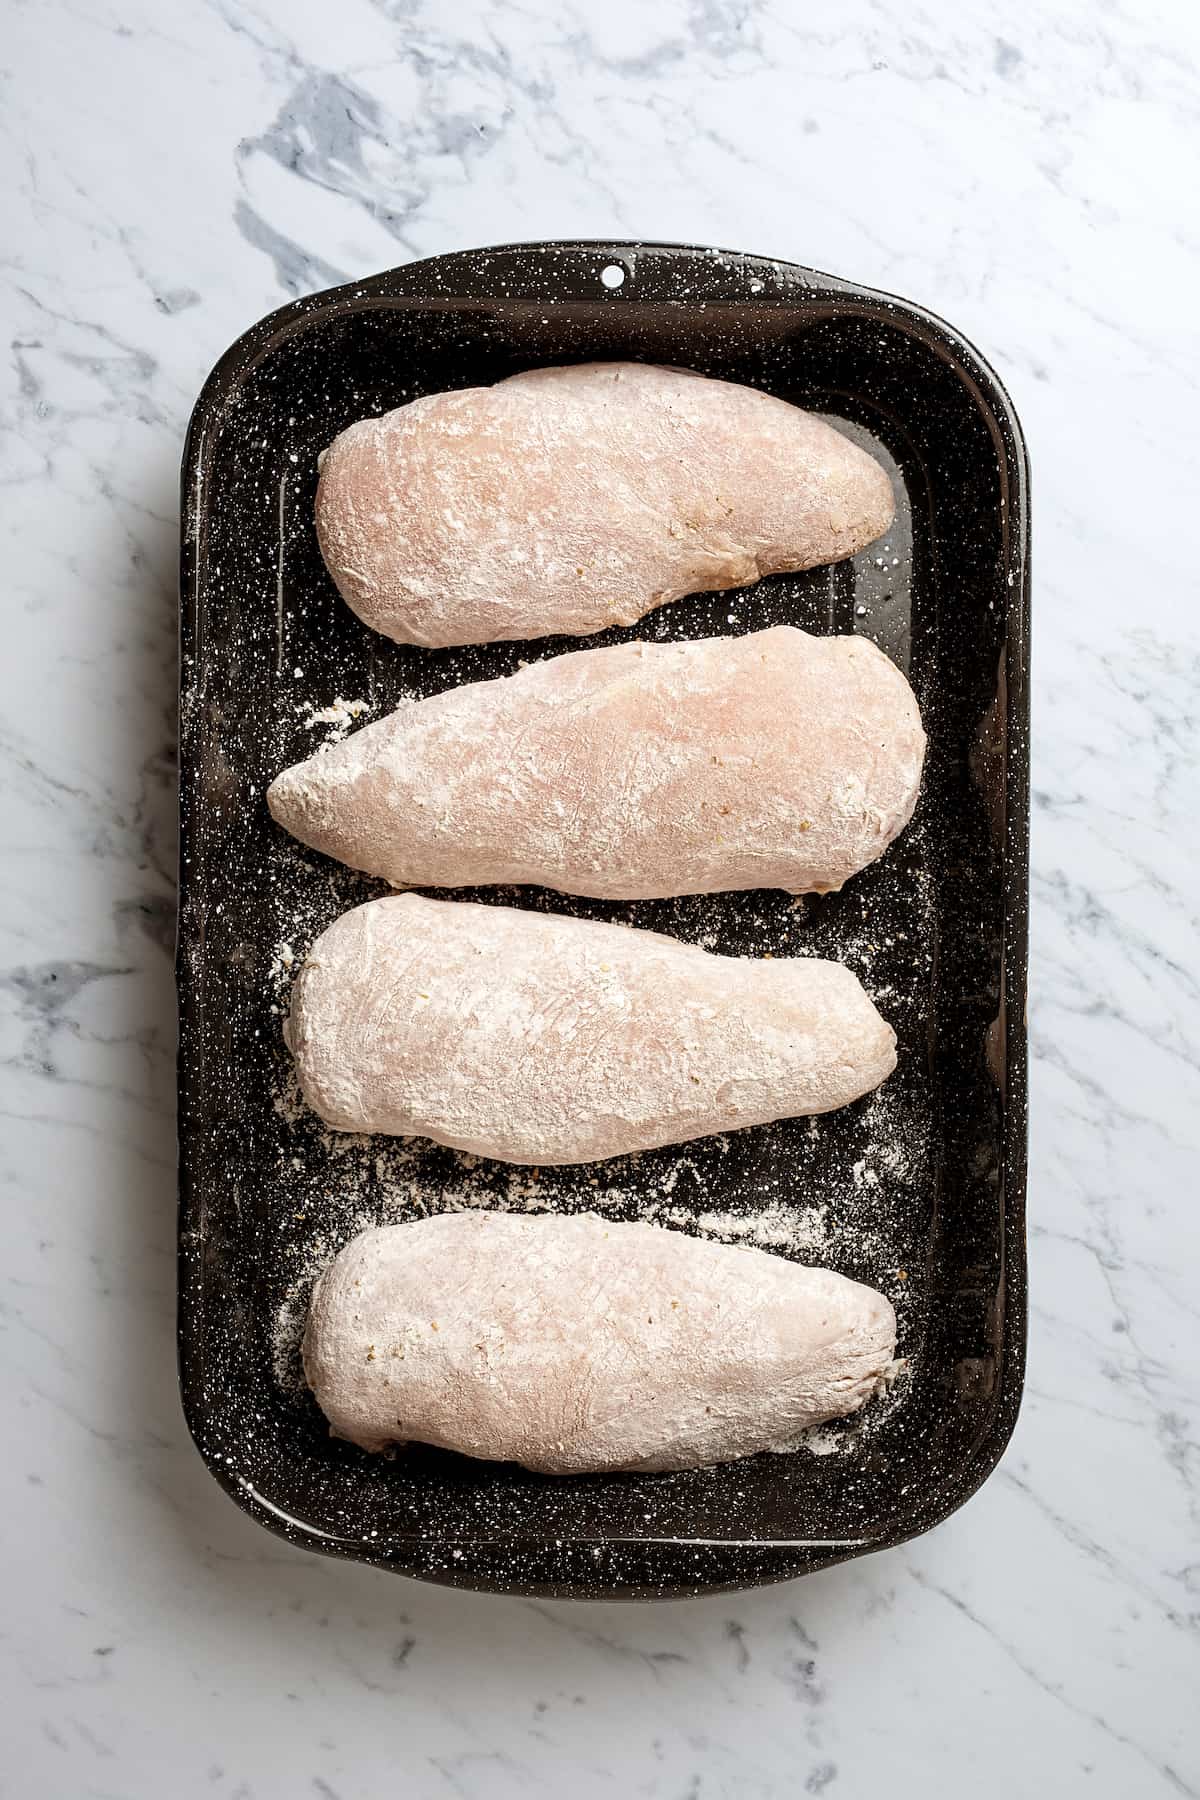 Four chicken breasts lightly coated in flour, lined up on a black baking dish.